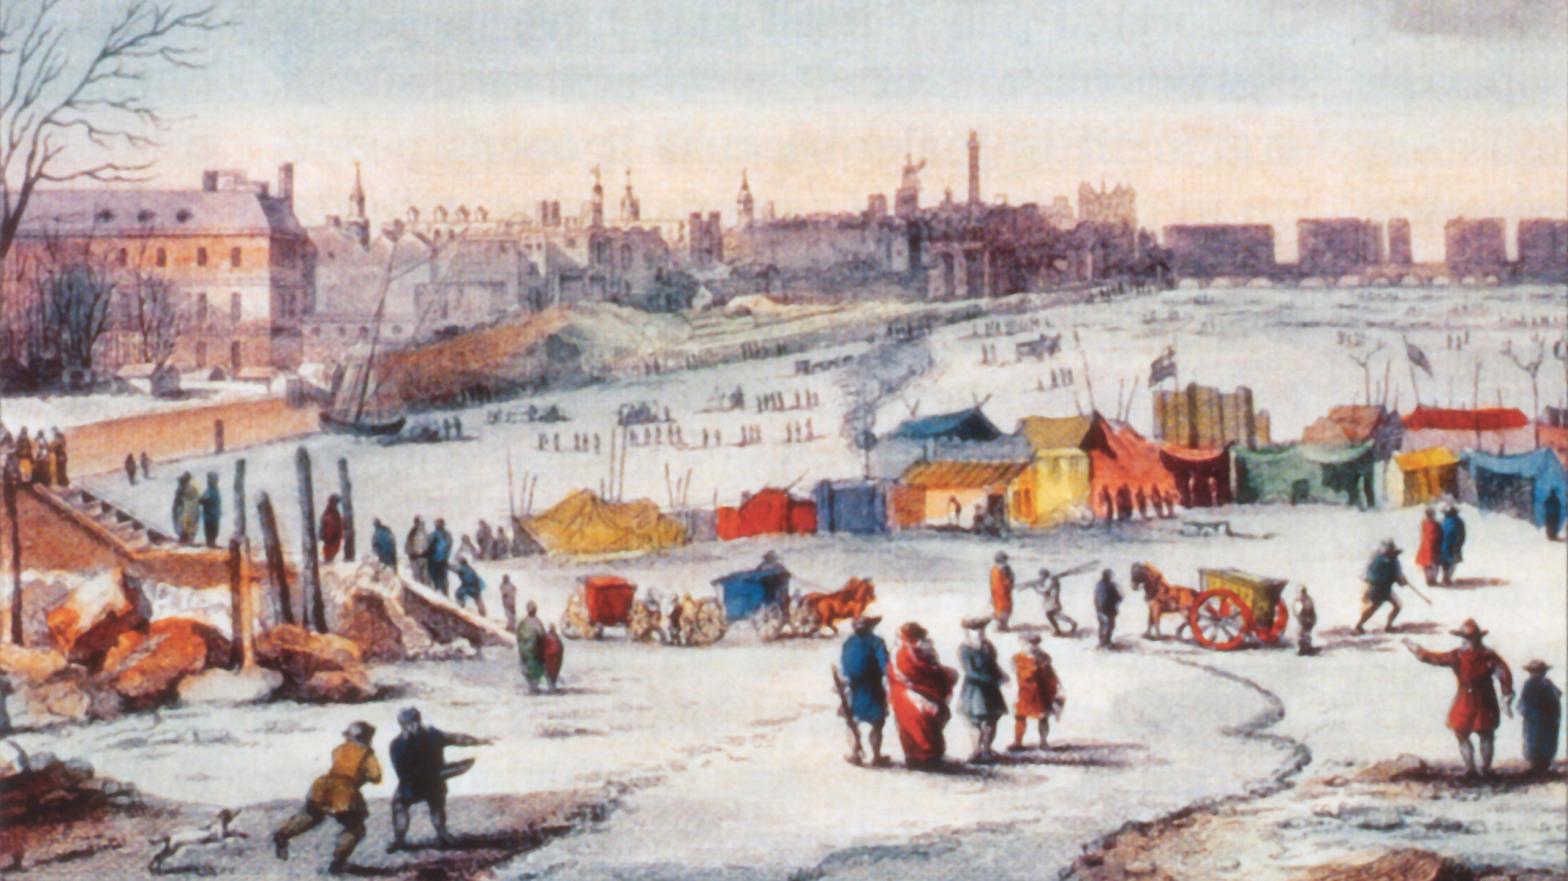 The frost of 1683 froze much of England, and fairs were held on the River Thames. (Illustration: Wikimedia Commons, Fair Use)